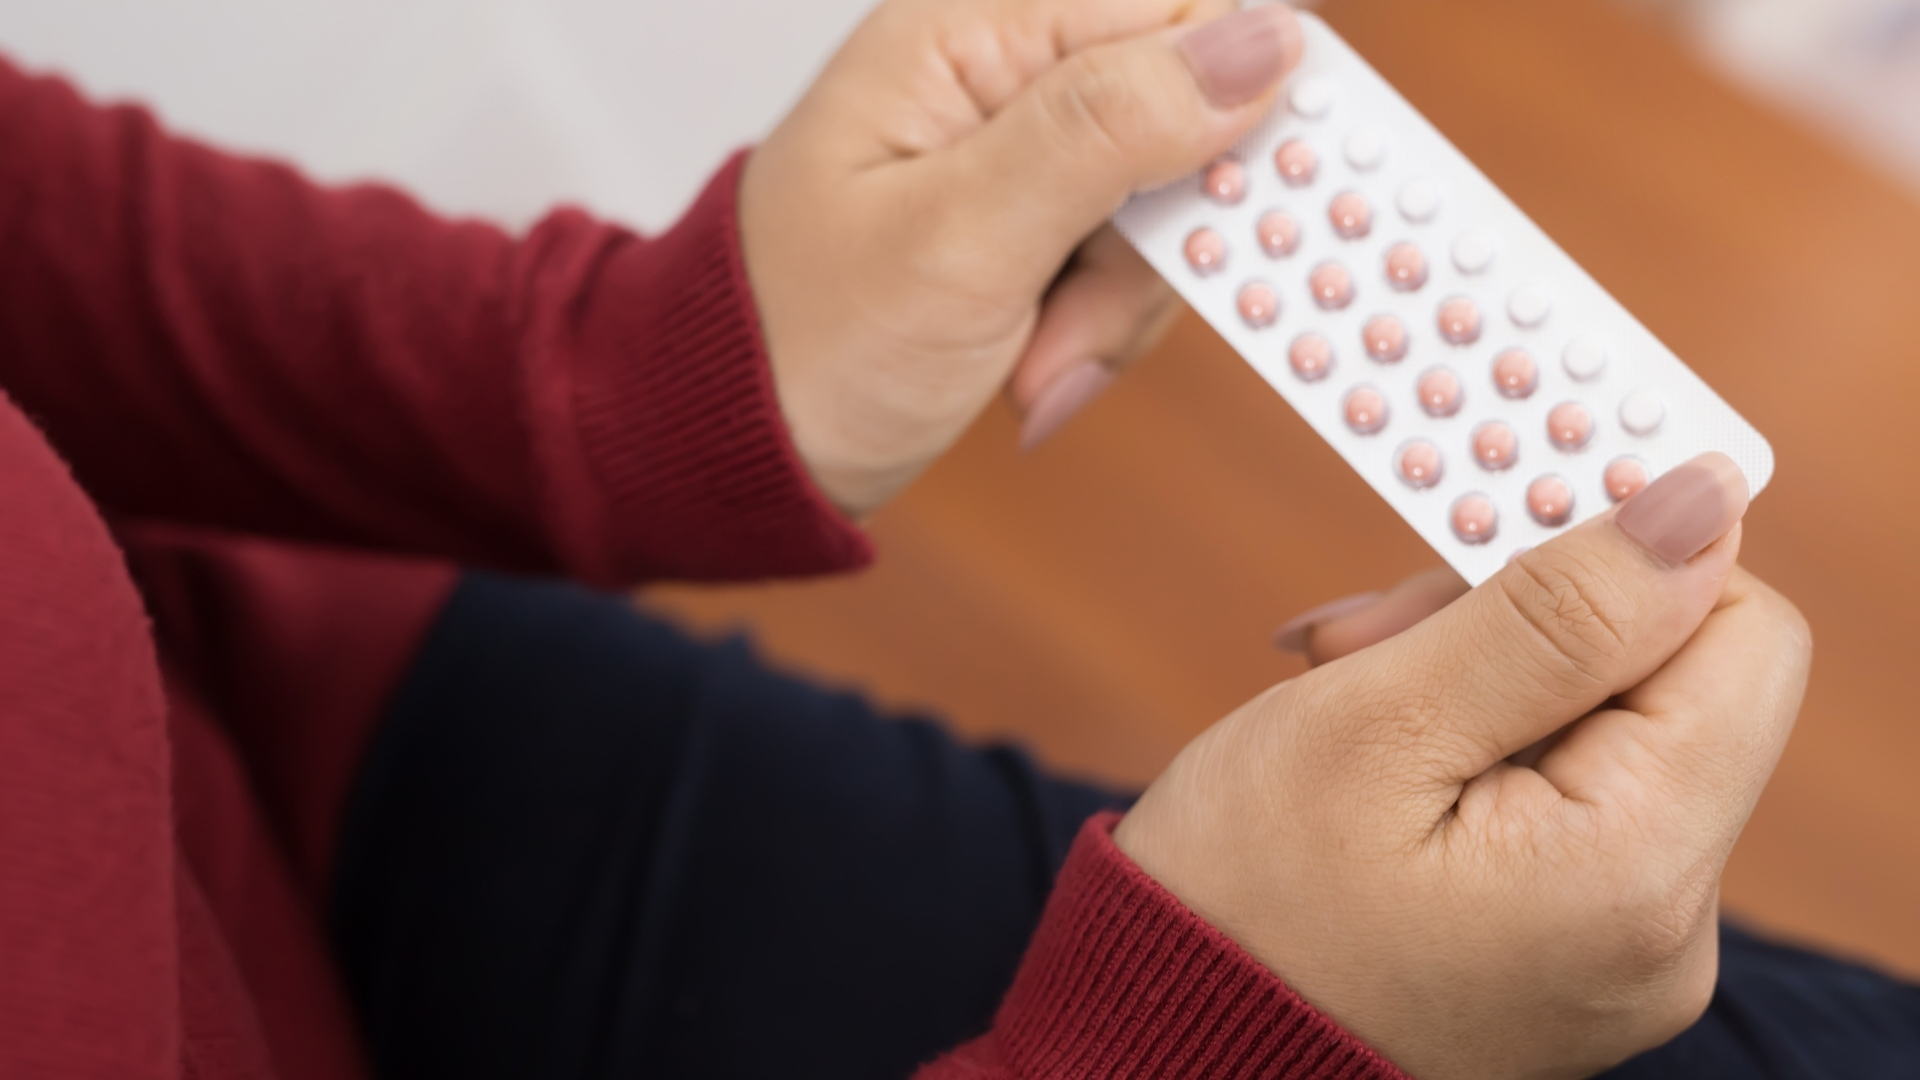 What You Need to Know When Going Off the Pill